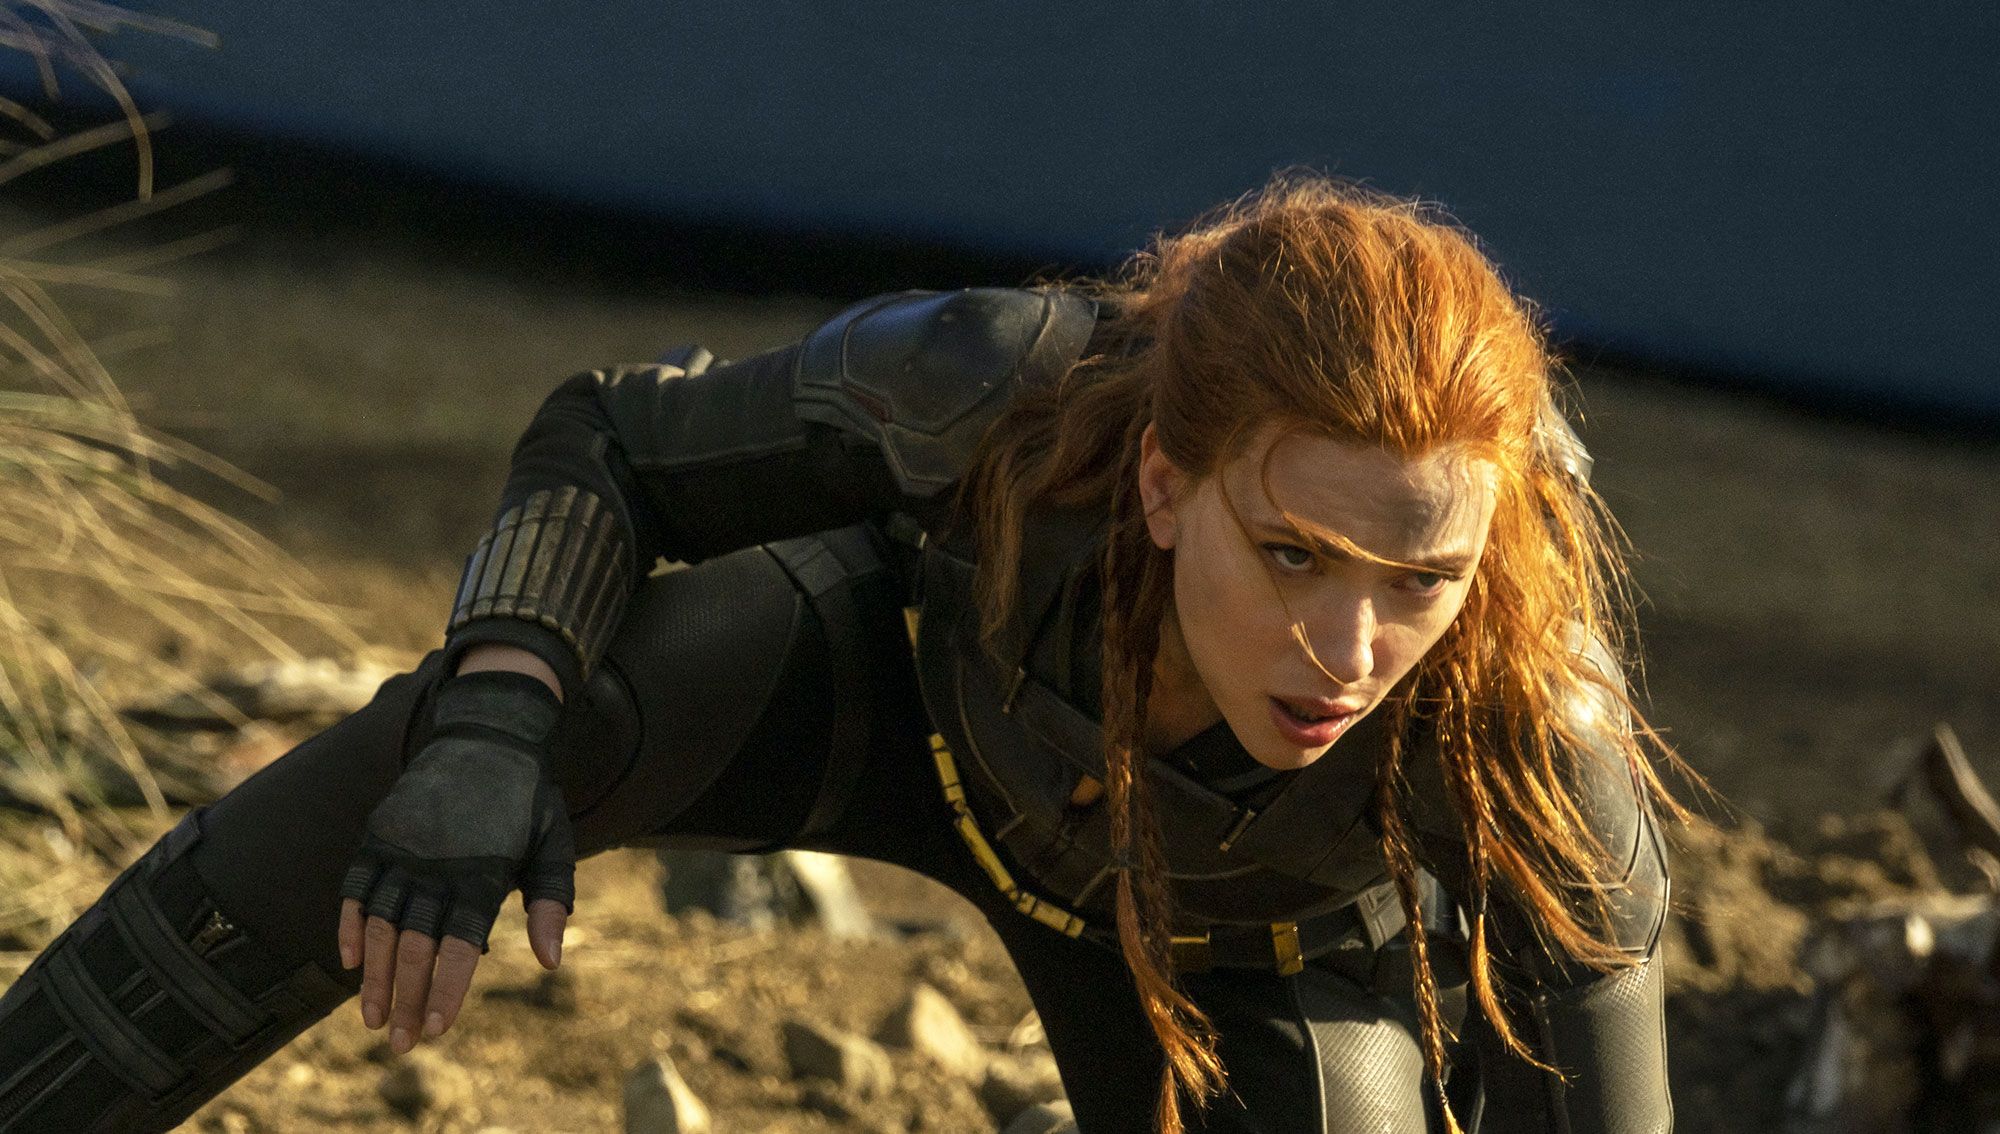 Black Widow - In Cinemas and on Disney+ with Premier Access